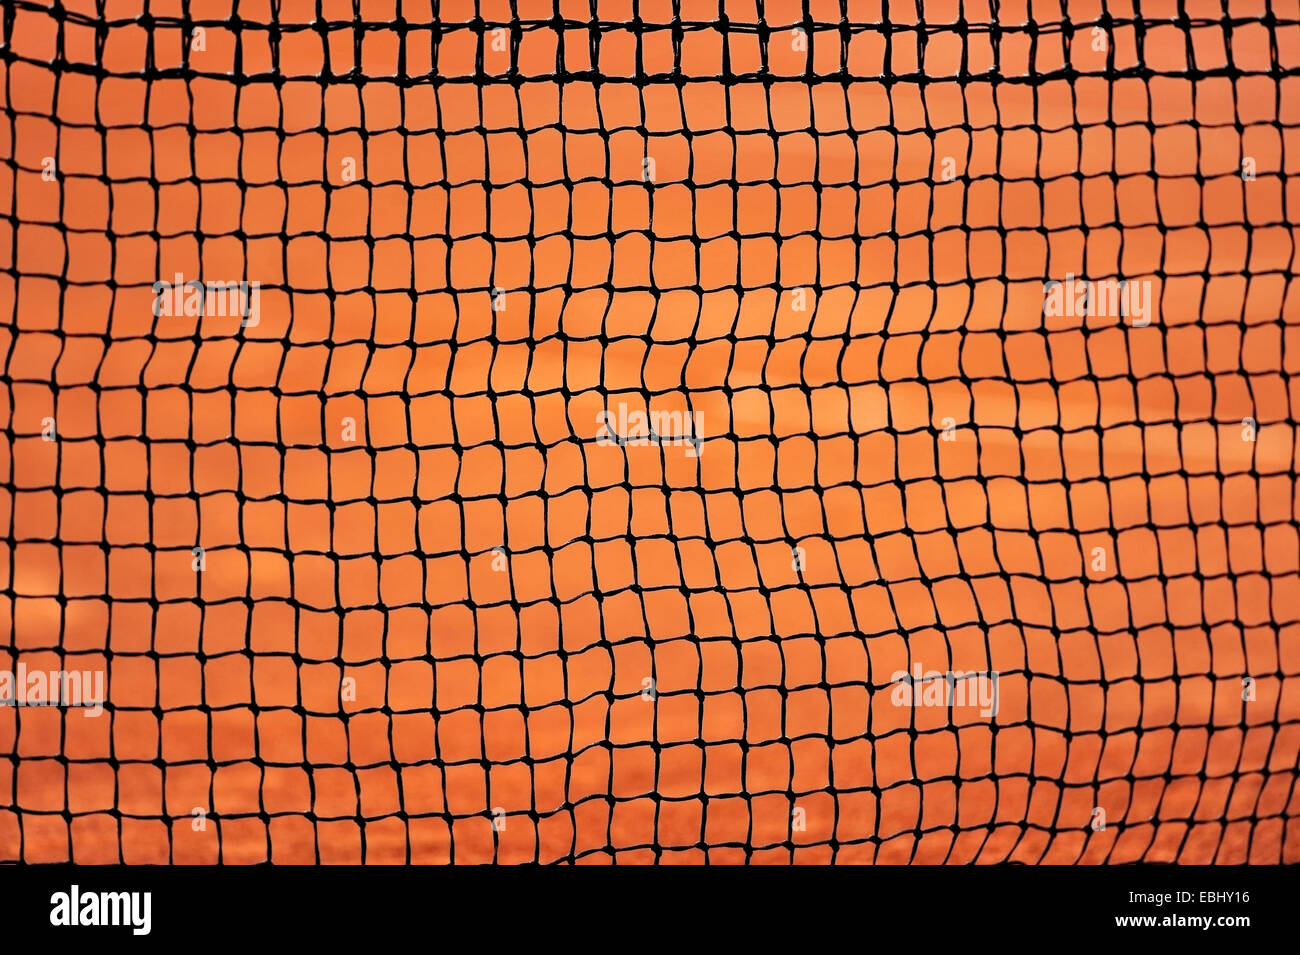 Sport detail shot with a tennis net on a clay court Stock Photo